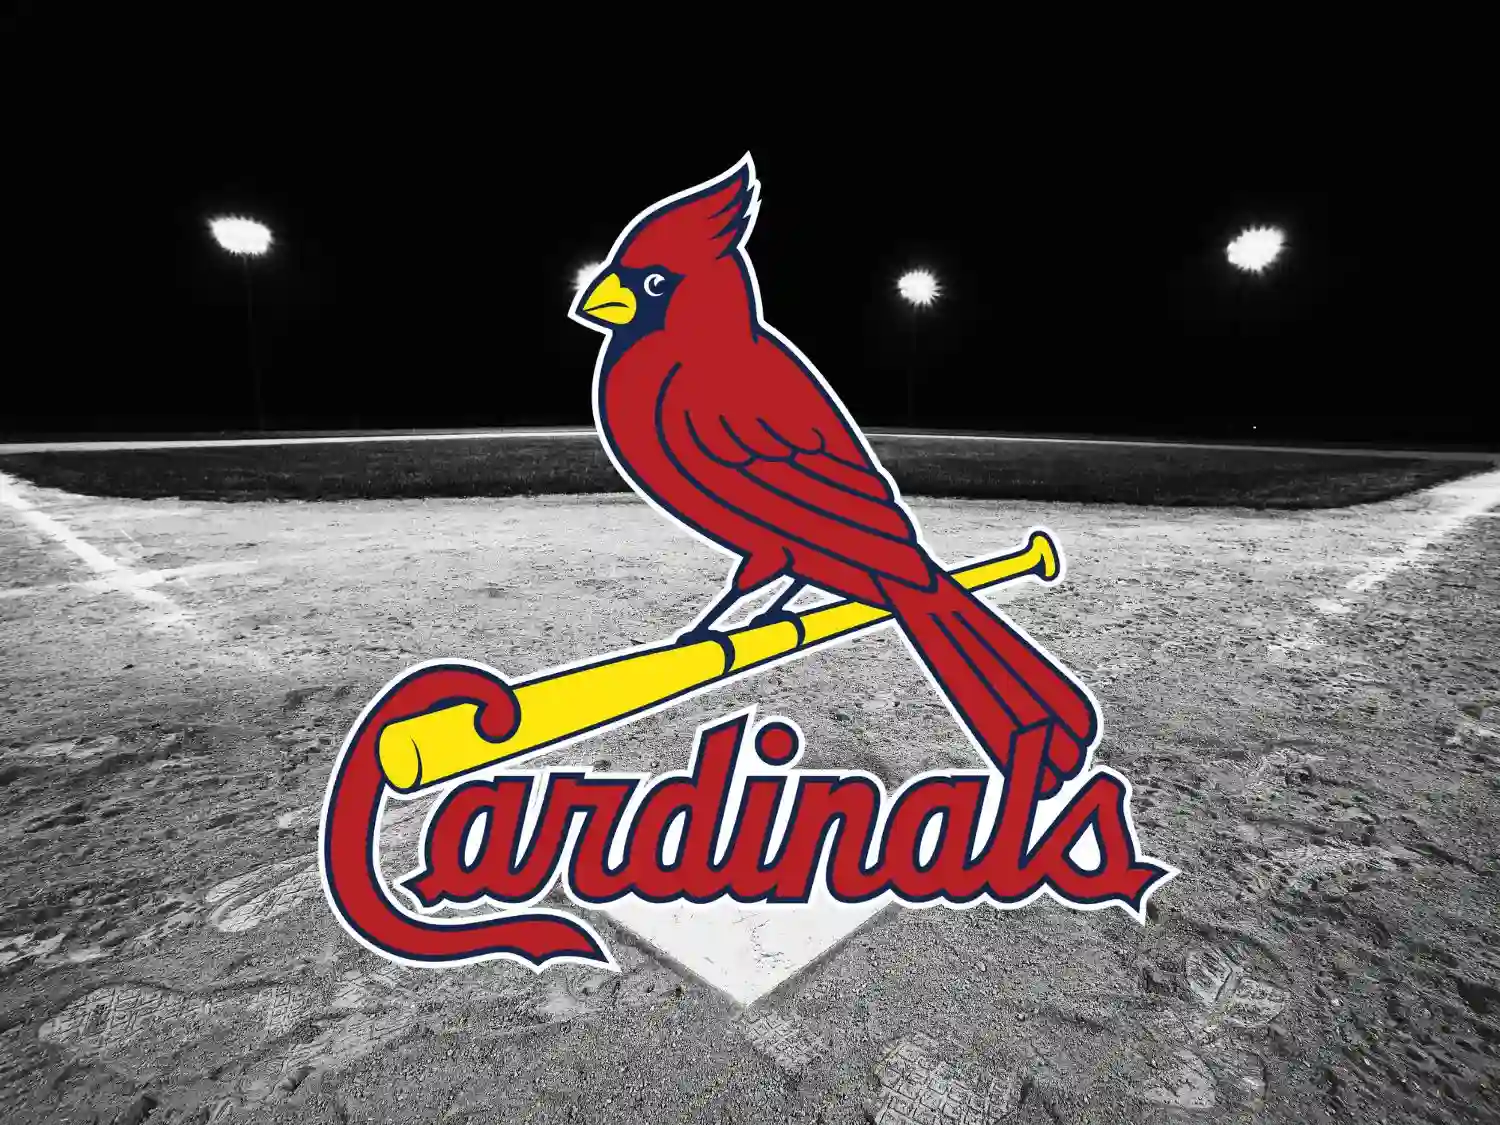 St Louis Cardinals Tickets and Seats